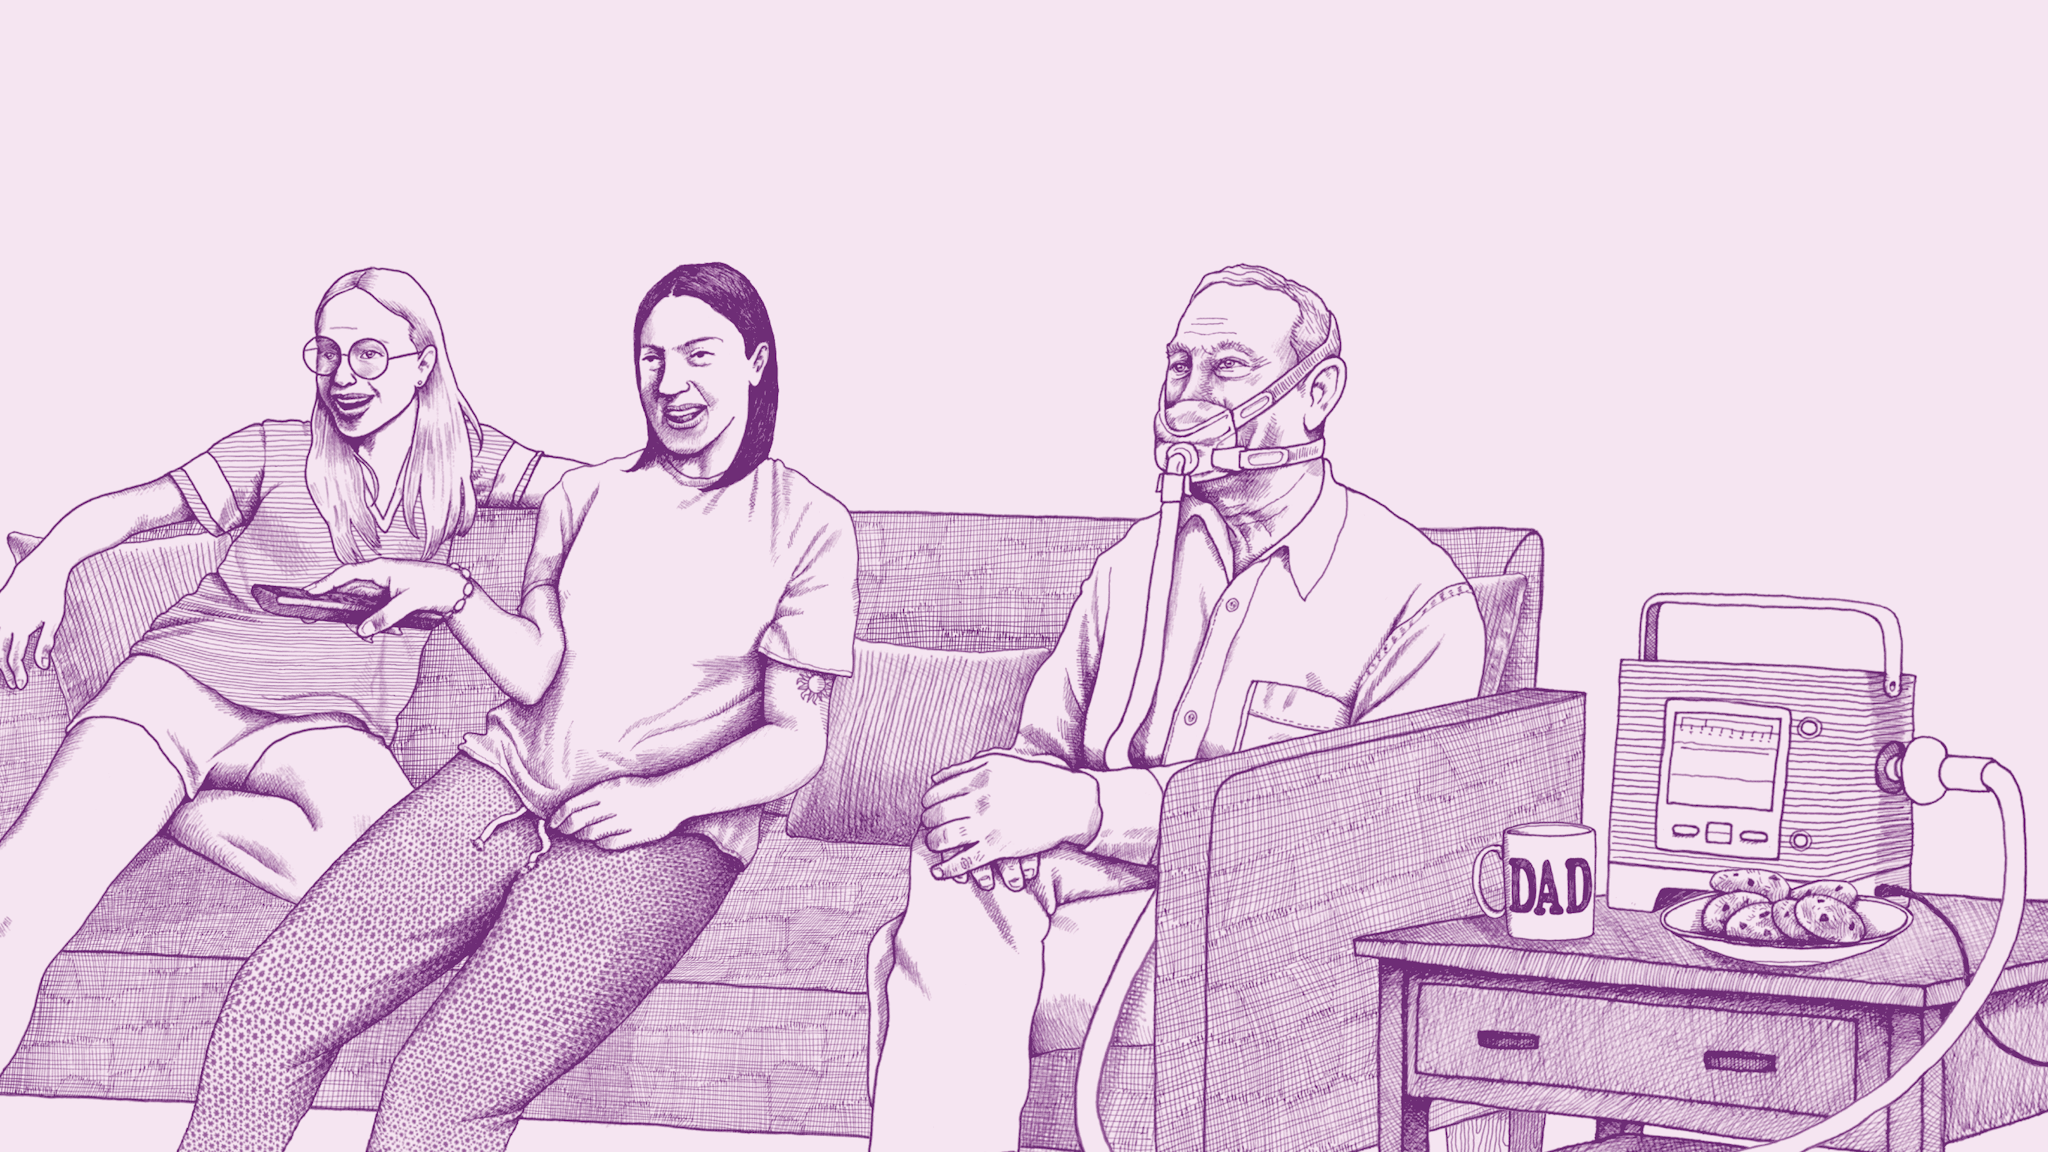 An illustration of a white woman smiling and sitting on a couch. She is joined by her female partner and older father, who is using an oxygen machine.